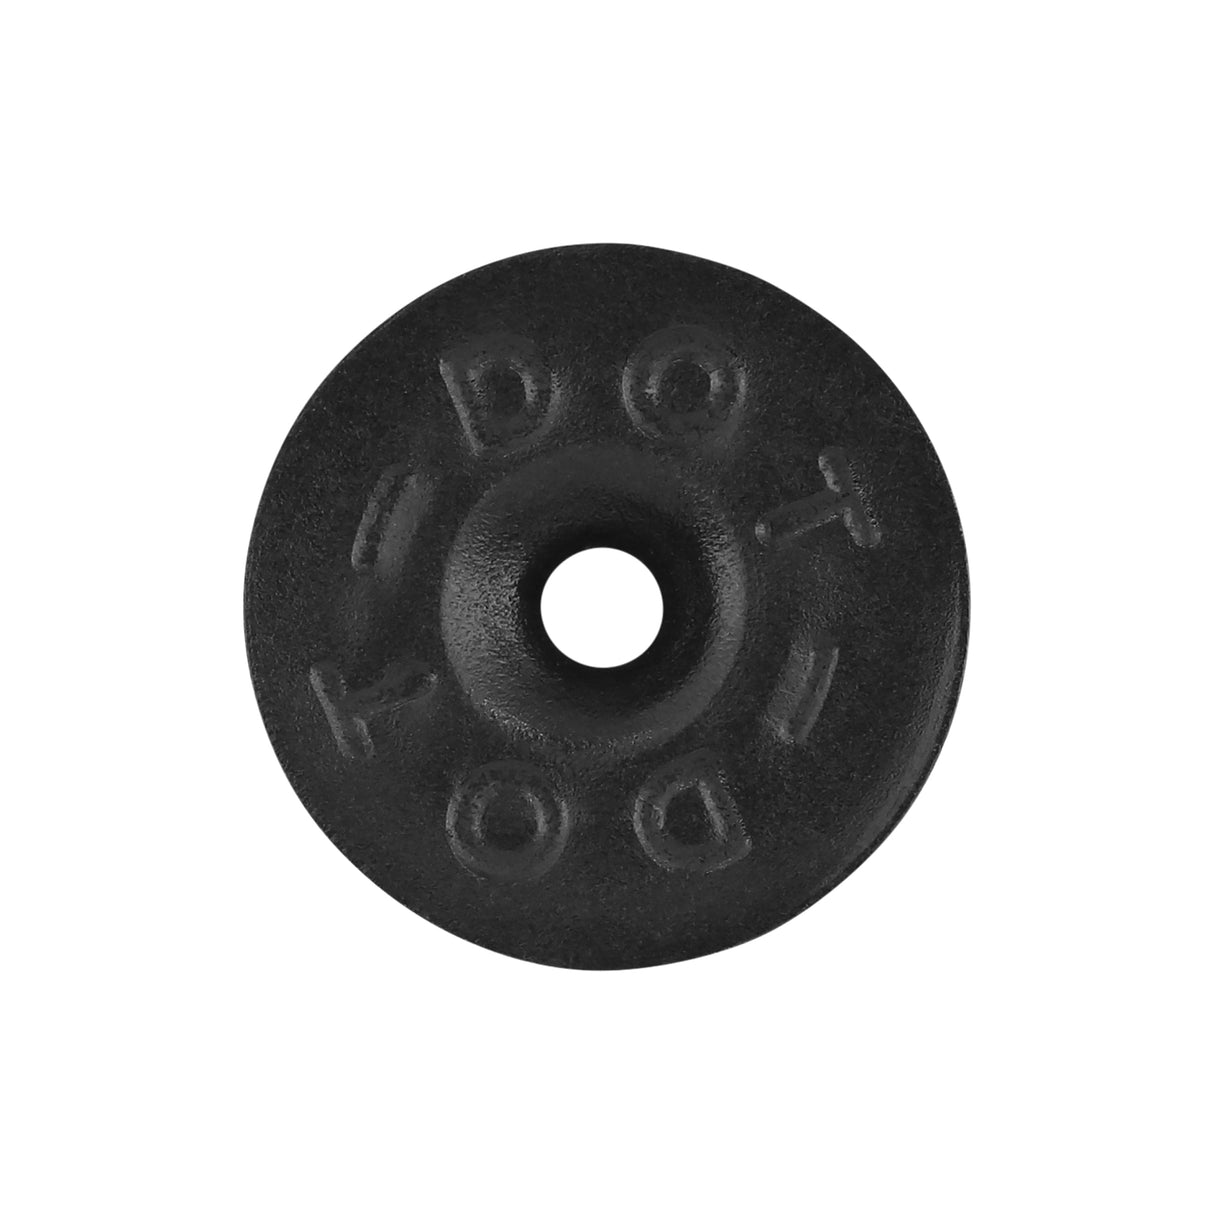 Ohio Travel Bag Fasteners Ligne 20 Black Oxide, Dot Baby Durable Post, Solid Brass, #12404-BLK-OX 12404-BLK-OX